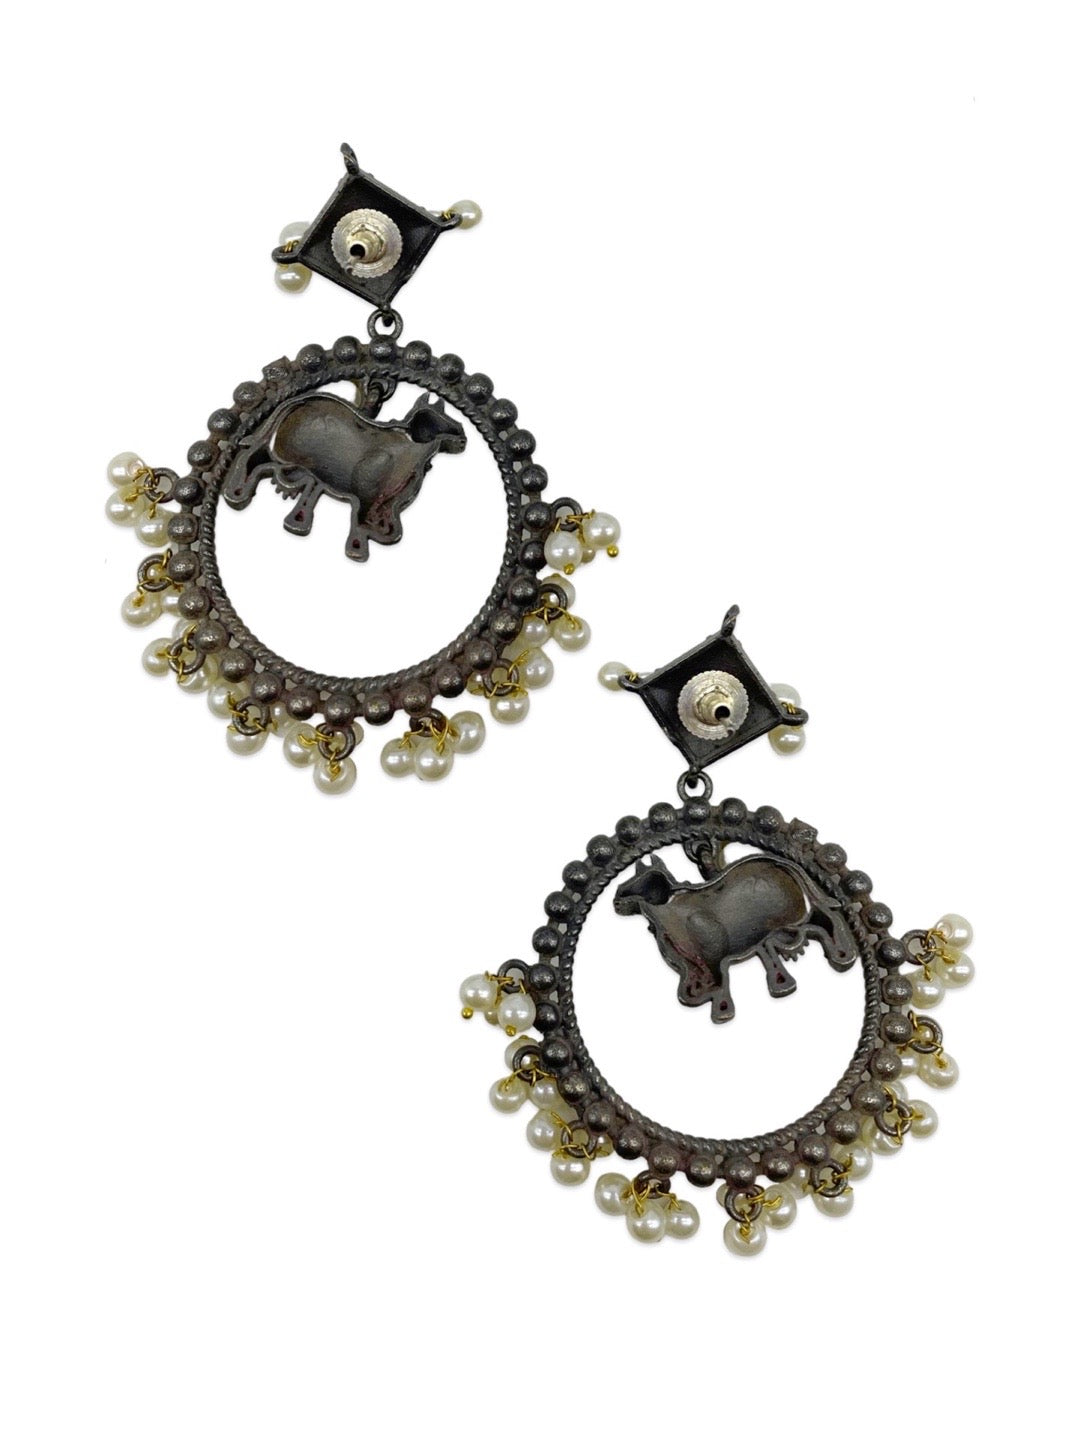 German Oxidized Silver Chand Bali Earrings With Dangler Cow Animal Design